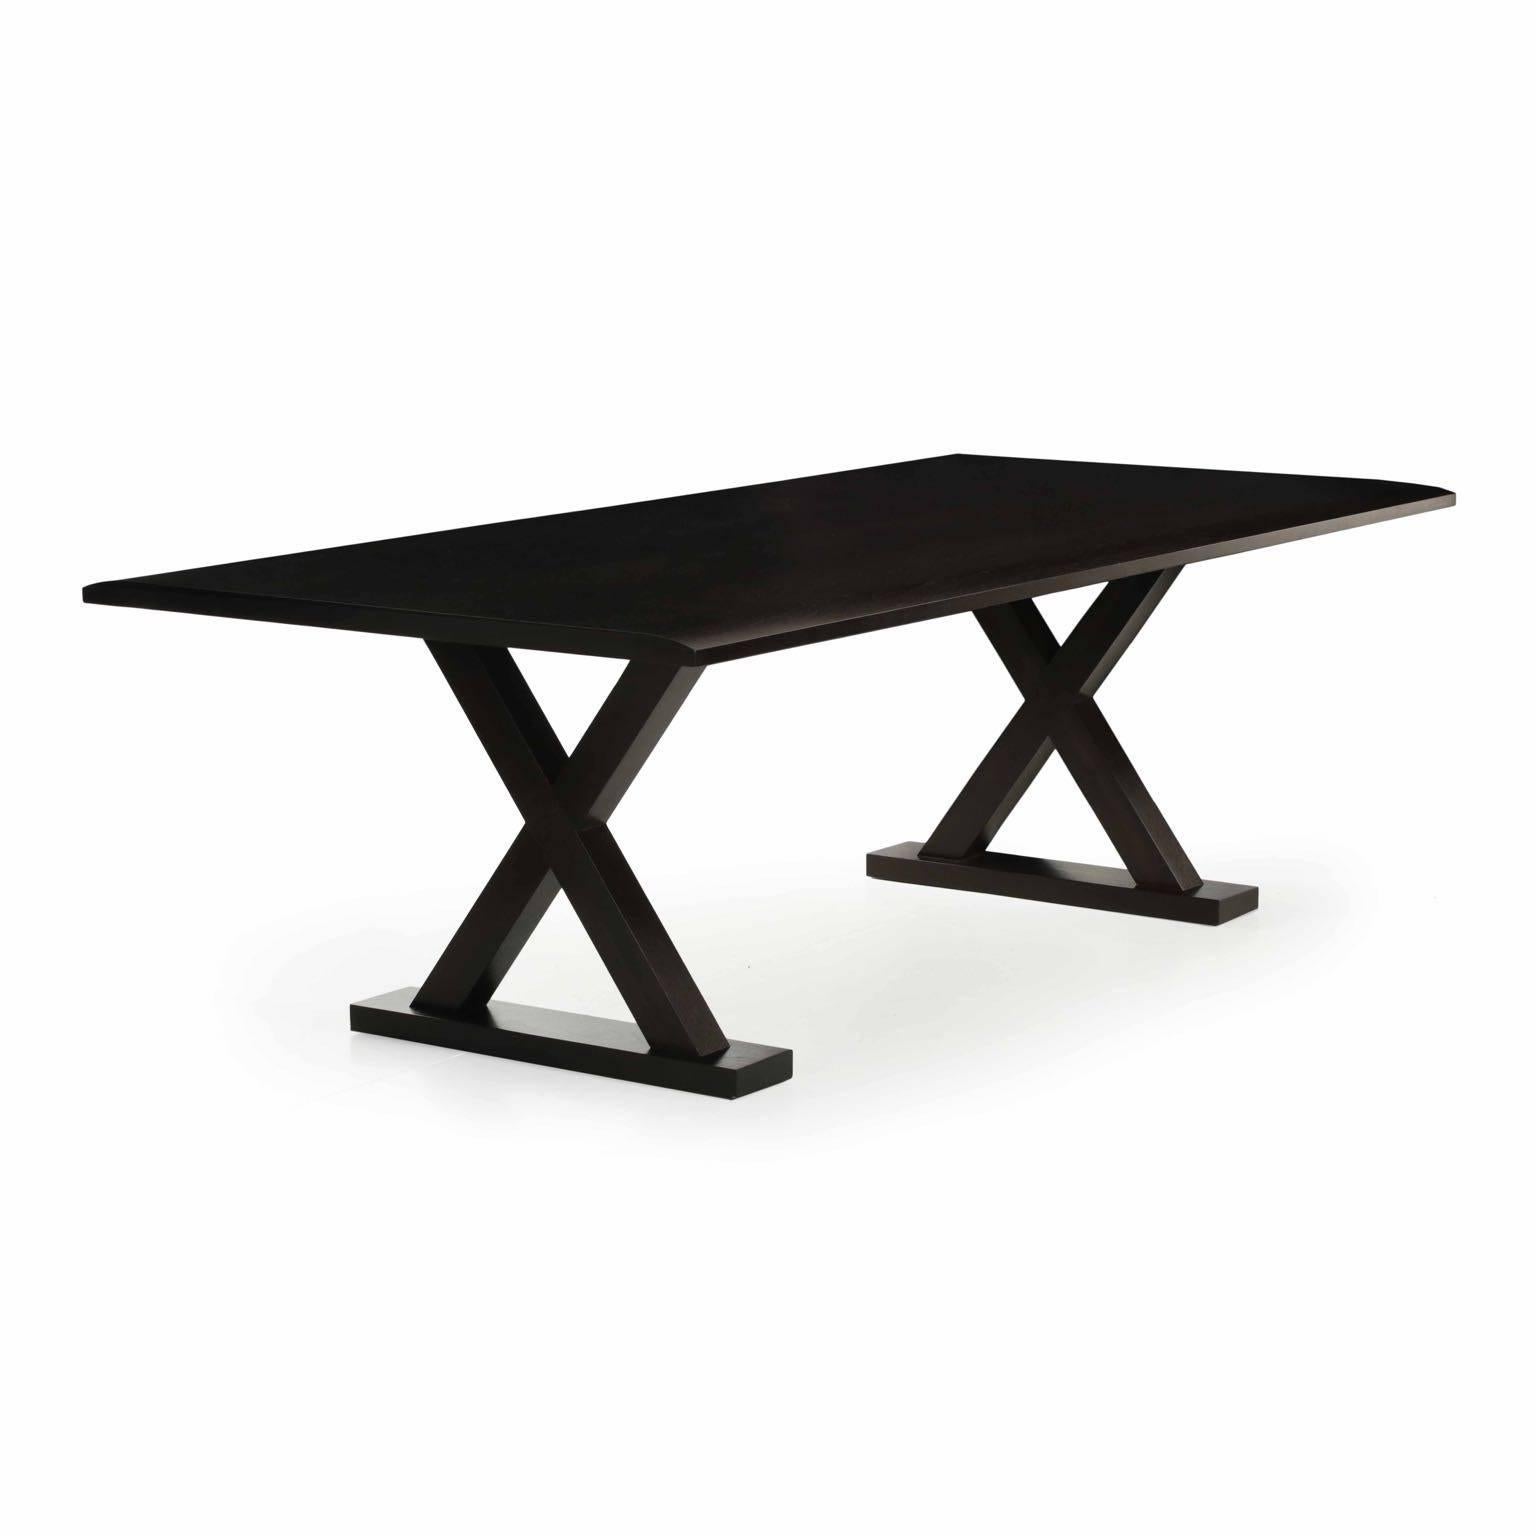 A striking modern dining table designed by Christian Liaigri, it was clearly cared for and remains in overall wonderful condition. The vivid grain of the wood is softened by the dark oiled surface while the edges of the table curve beautifully to